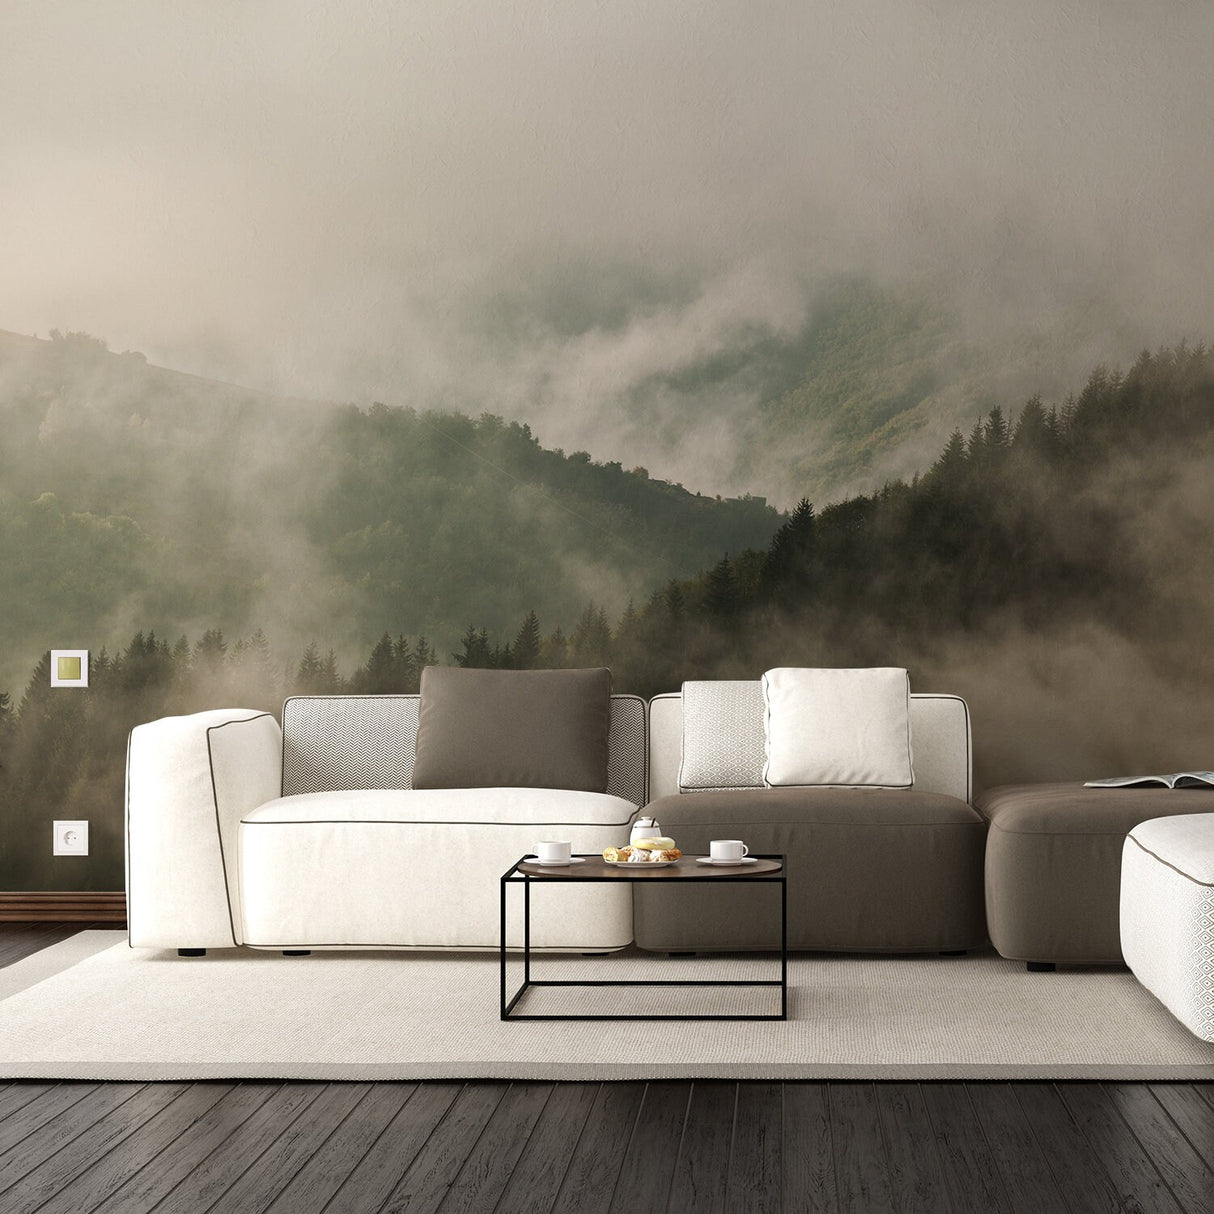 Foggy Forest Wallpaper Sticker Mural - Mountain Tree Fog Removable Wall Paper Art Decal